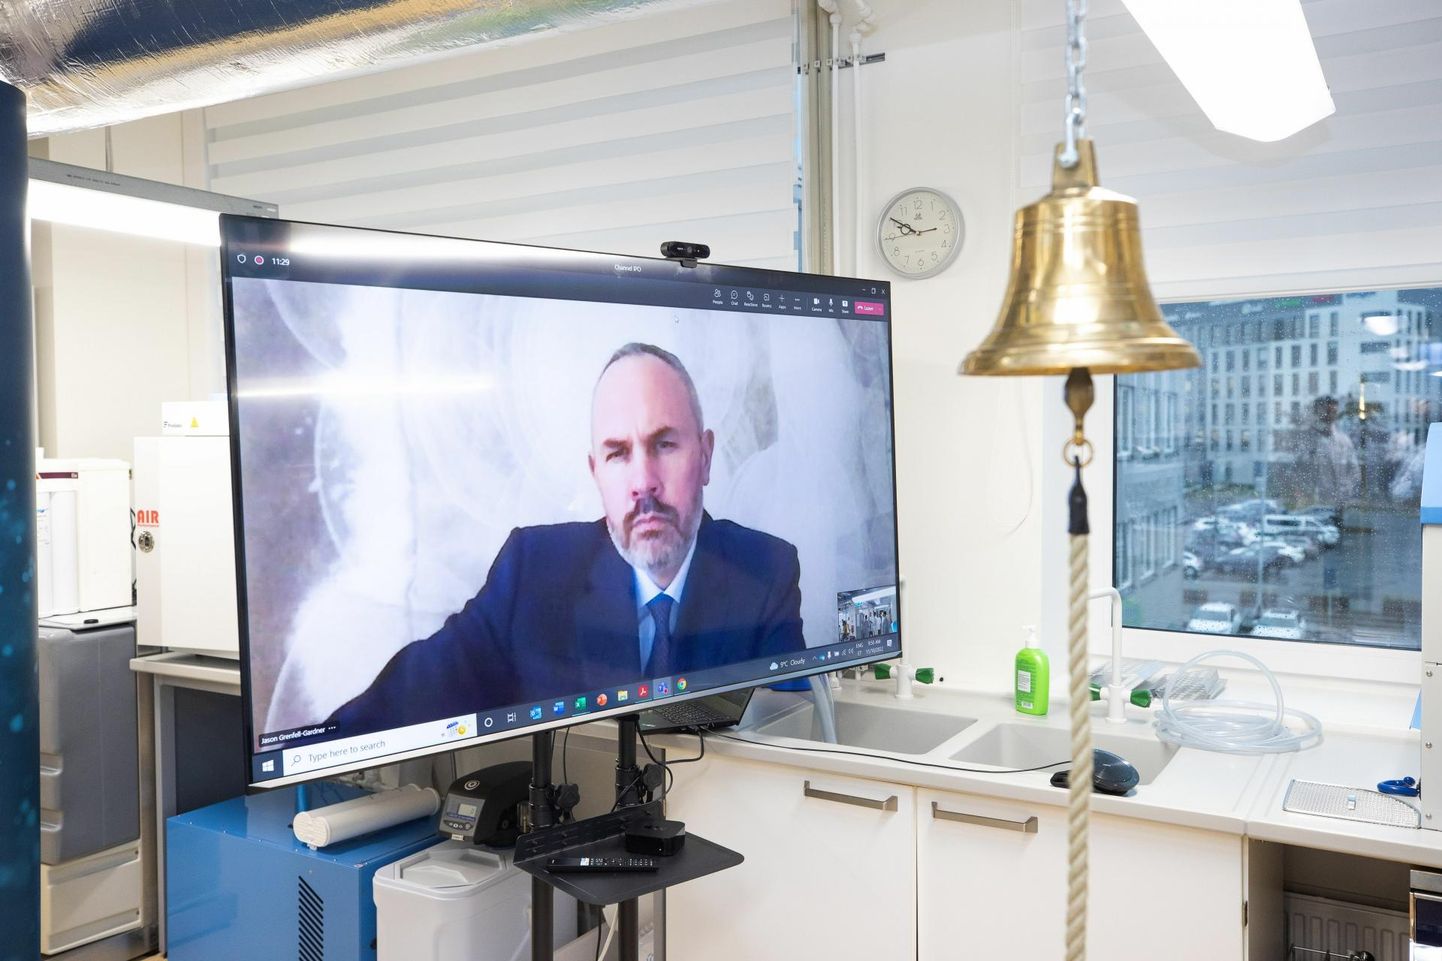 The stock offering of the pharmaceutical company J. Molner, which went on the alternative stock exchange in November, was not fully subscribed. The traditional bell-ringing ceremony took place in the company's laboratory. Board member Jason Grenfell-Gardner on the screen.